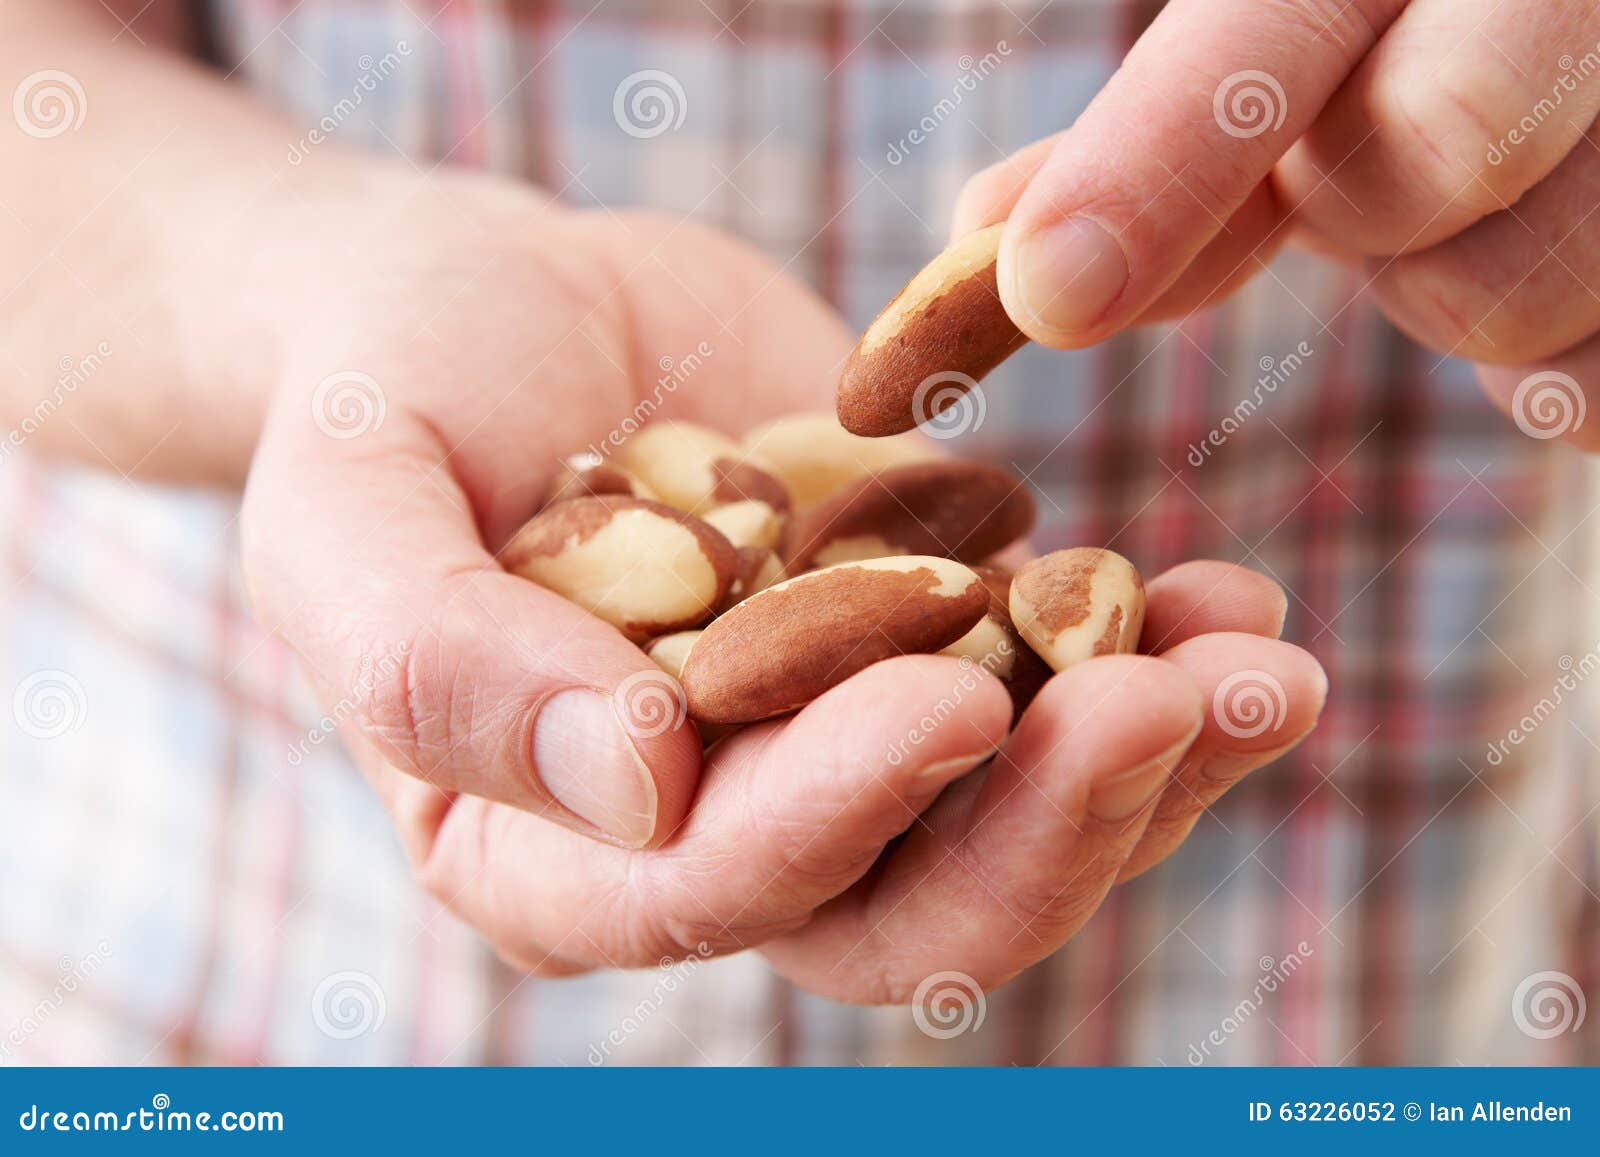 close up of man eating healthy snack of brazil nuts